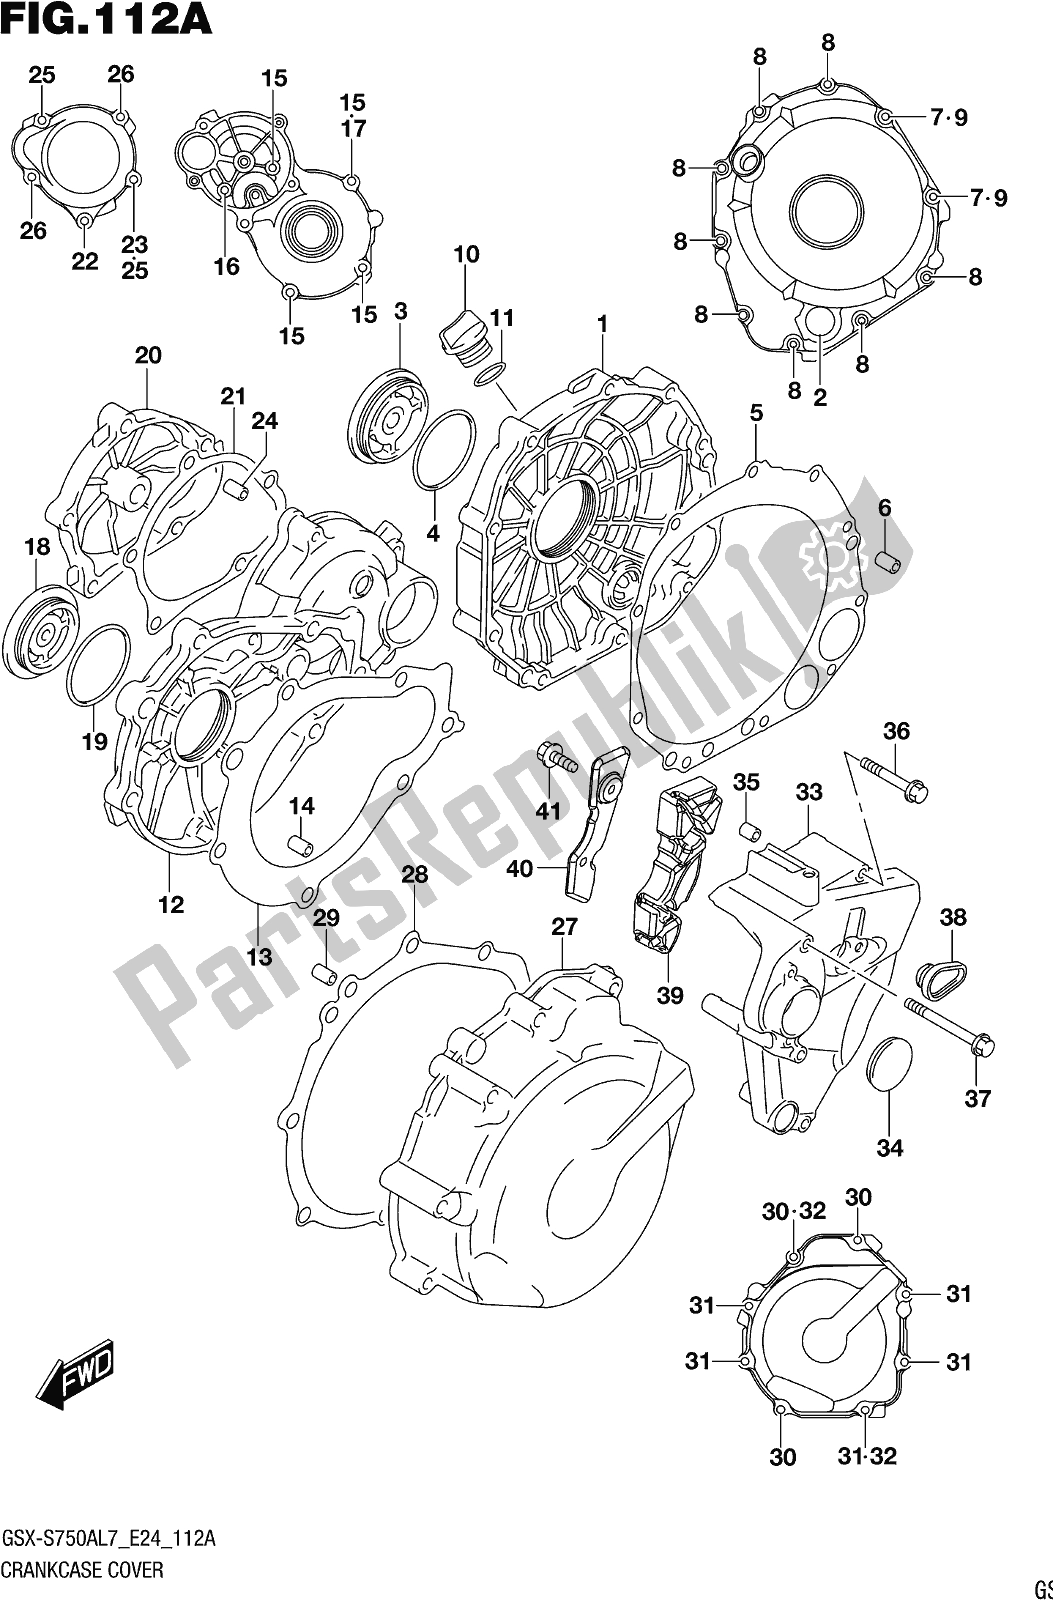 All parts for the Fig. 112a Crankcase Cover of the Suzuki Gsx-s 750 AZ 2017